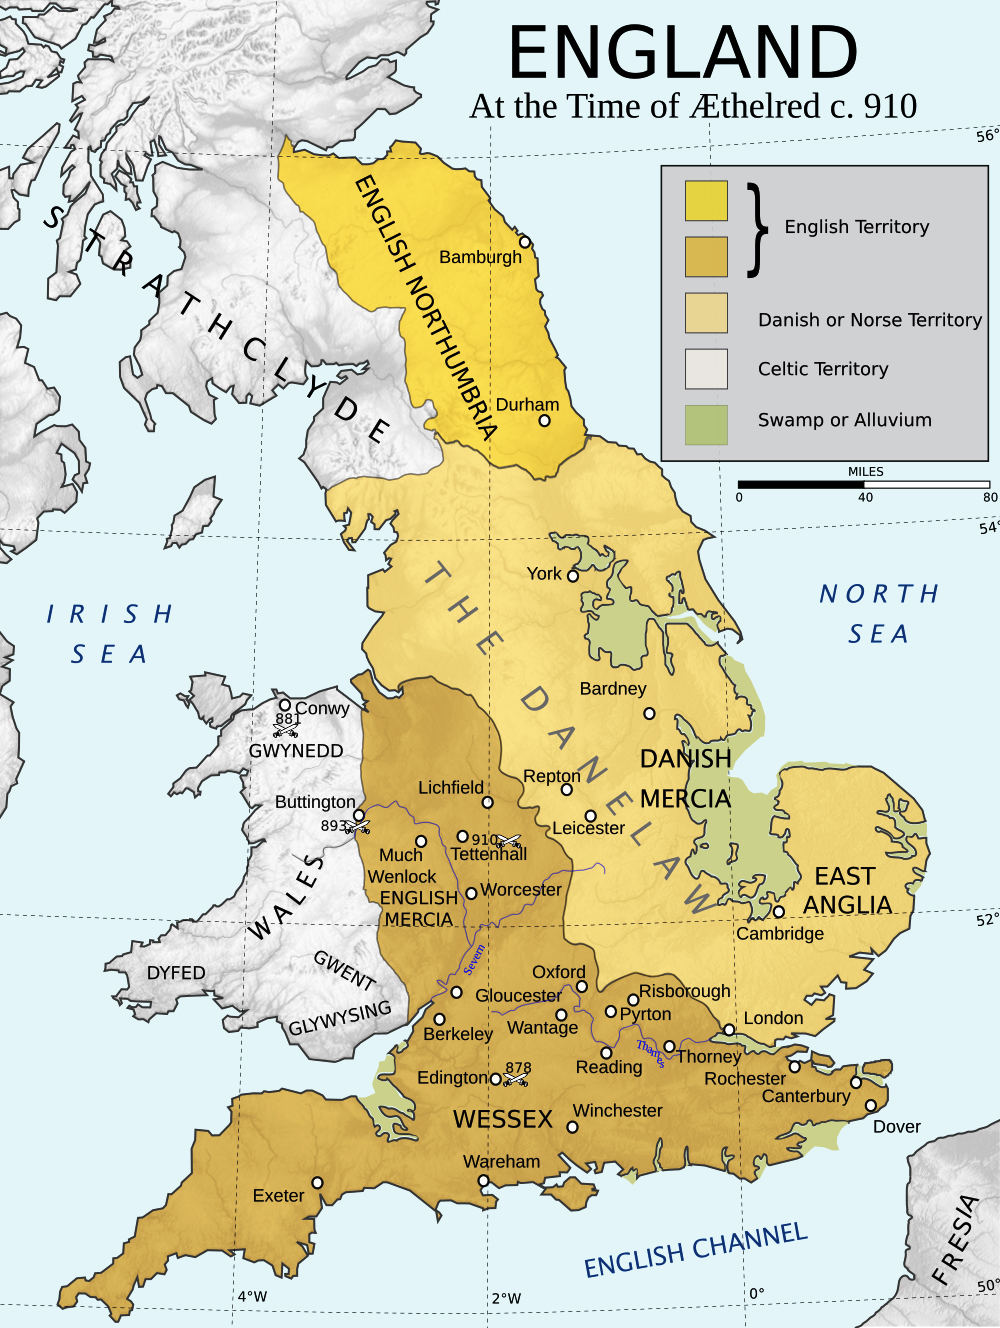 A map of England in the 10th century, showing the English, Danelaw and Celtic territories, the kingdoms and cities, and the bodies of water.